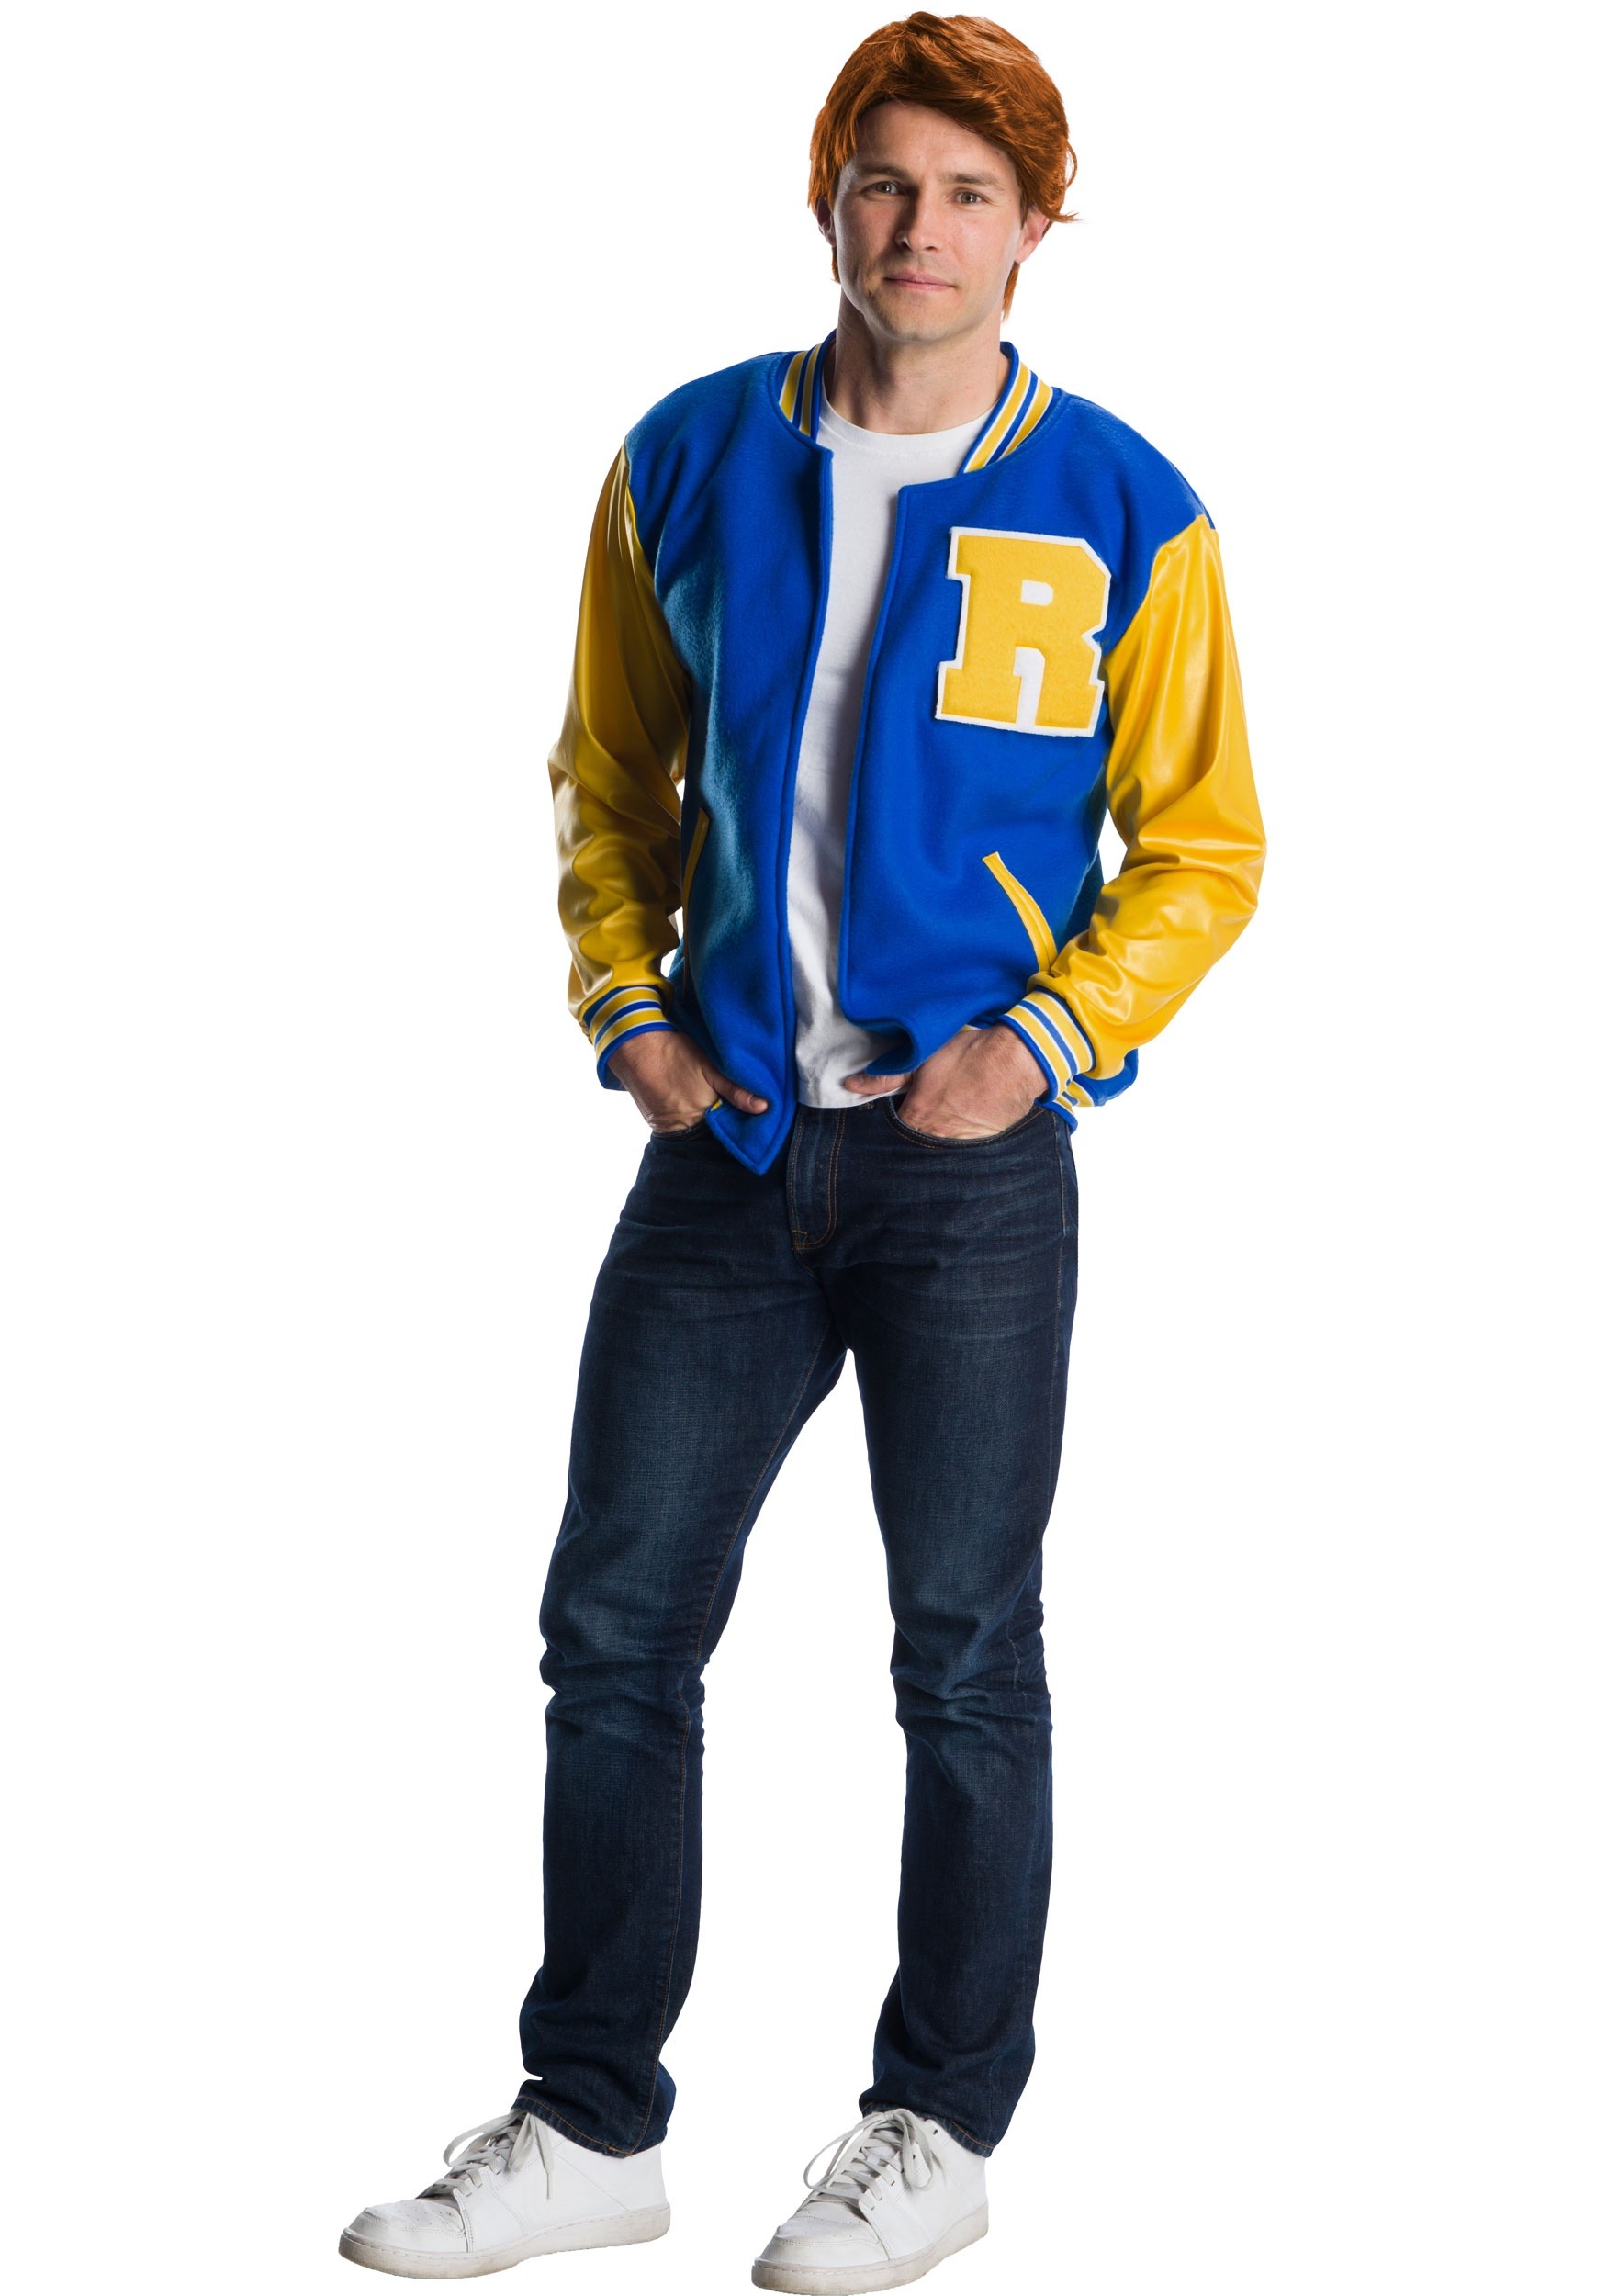 Photos - Fancy Dress Rubies Costume Co. Inc Riverdale Adult Archie Andrews Costume Blue/Yel 